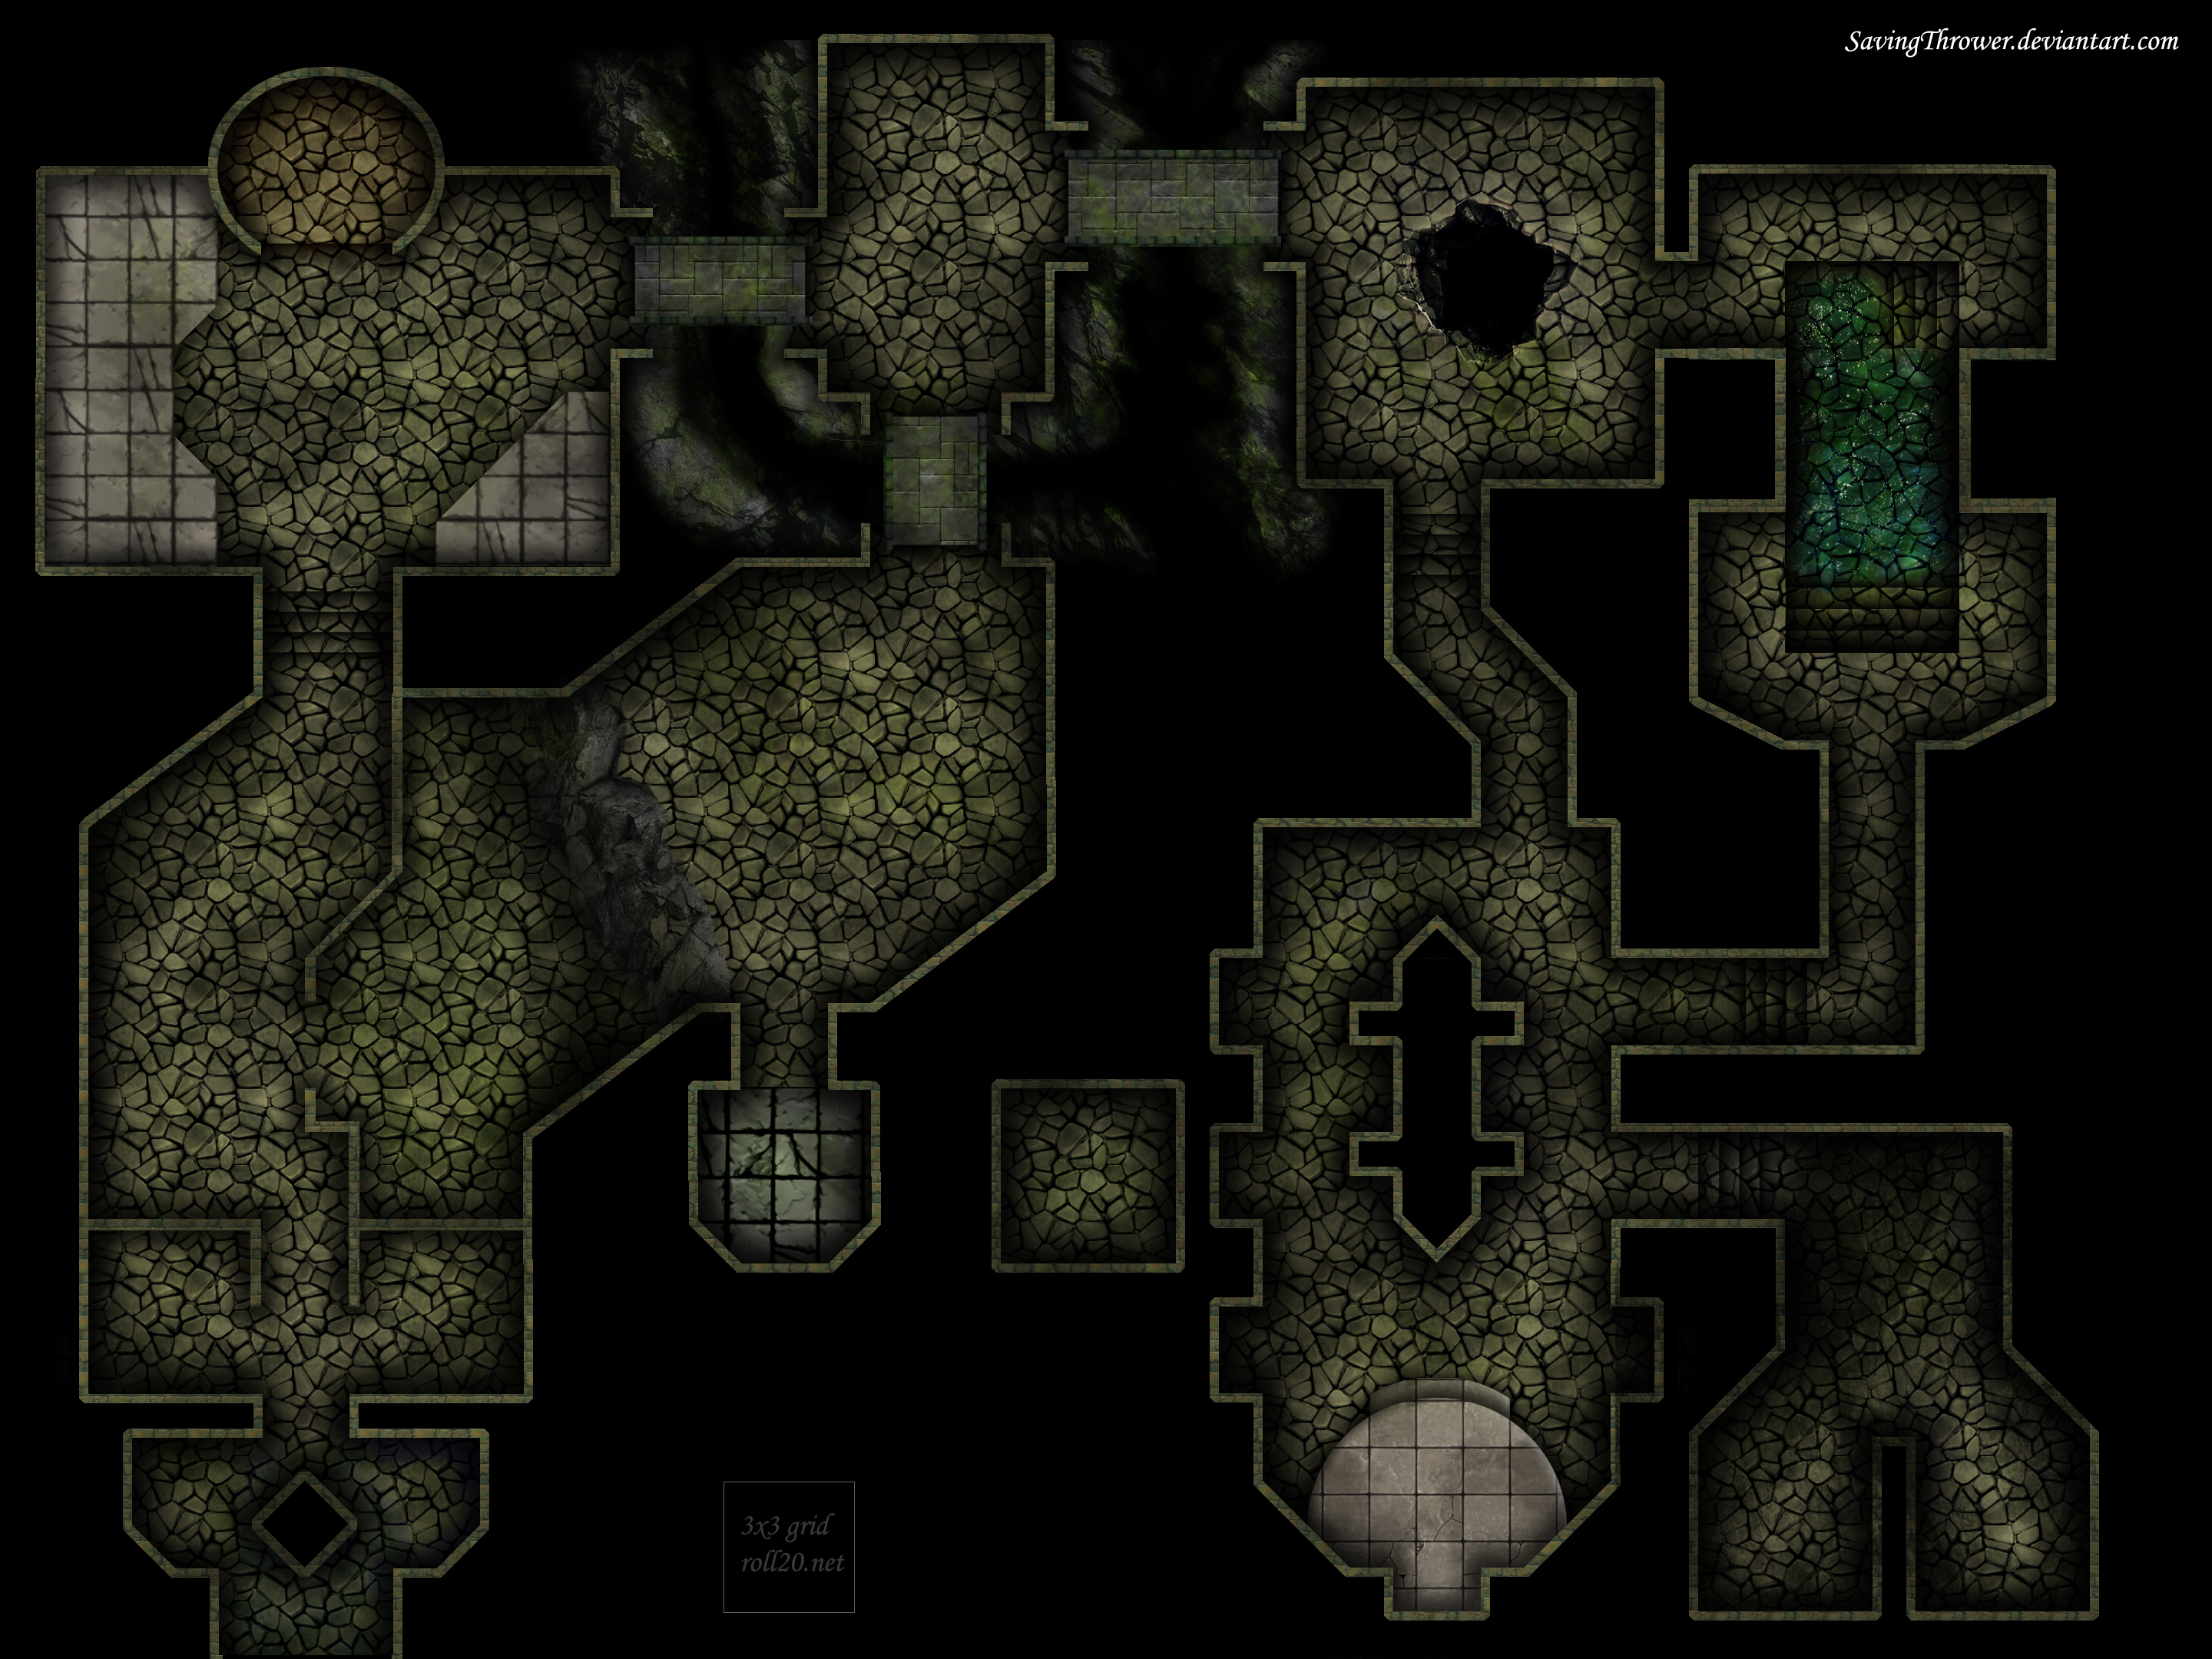 Clean dark dungeon map for online DnD / Roll20 by SavingThrower on